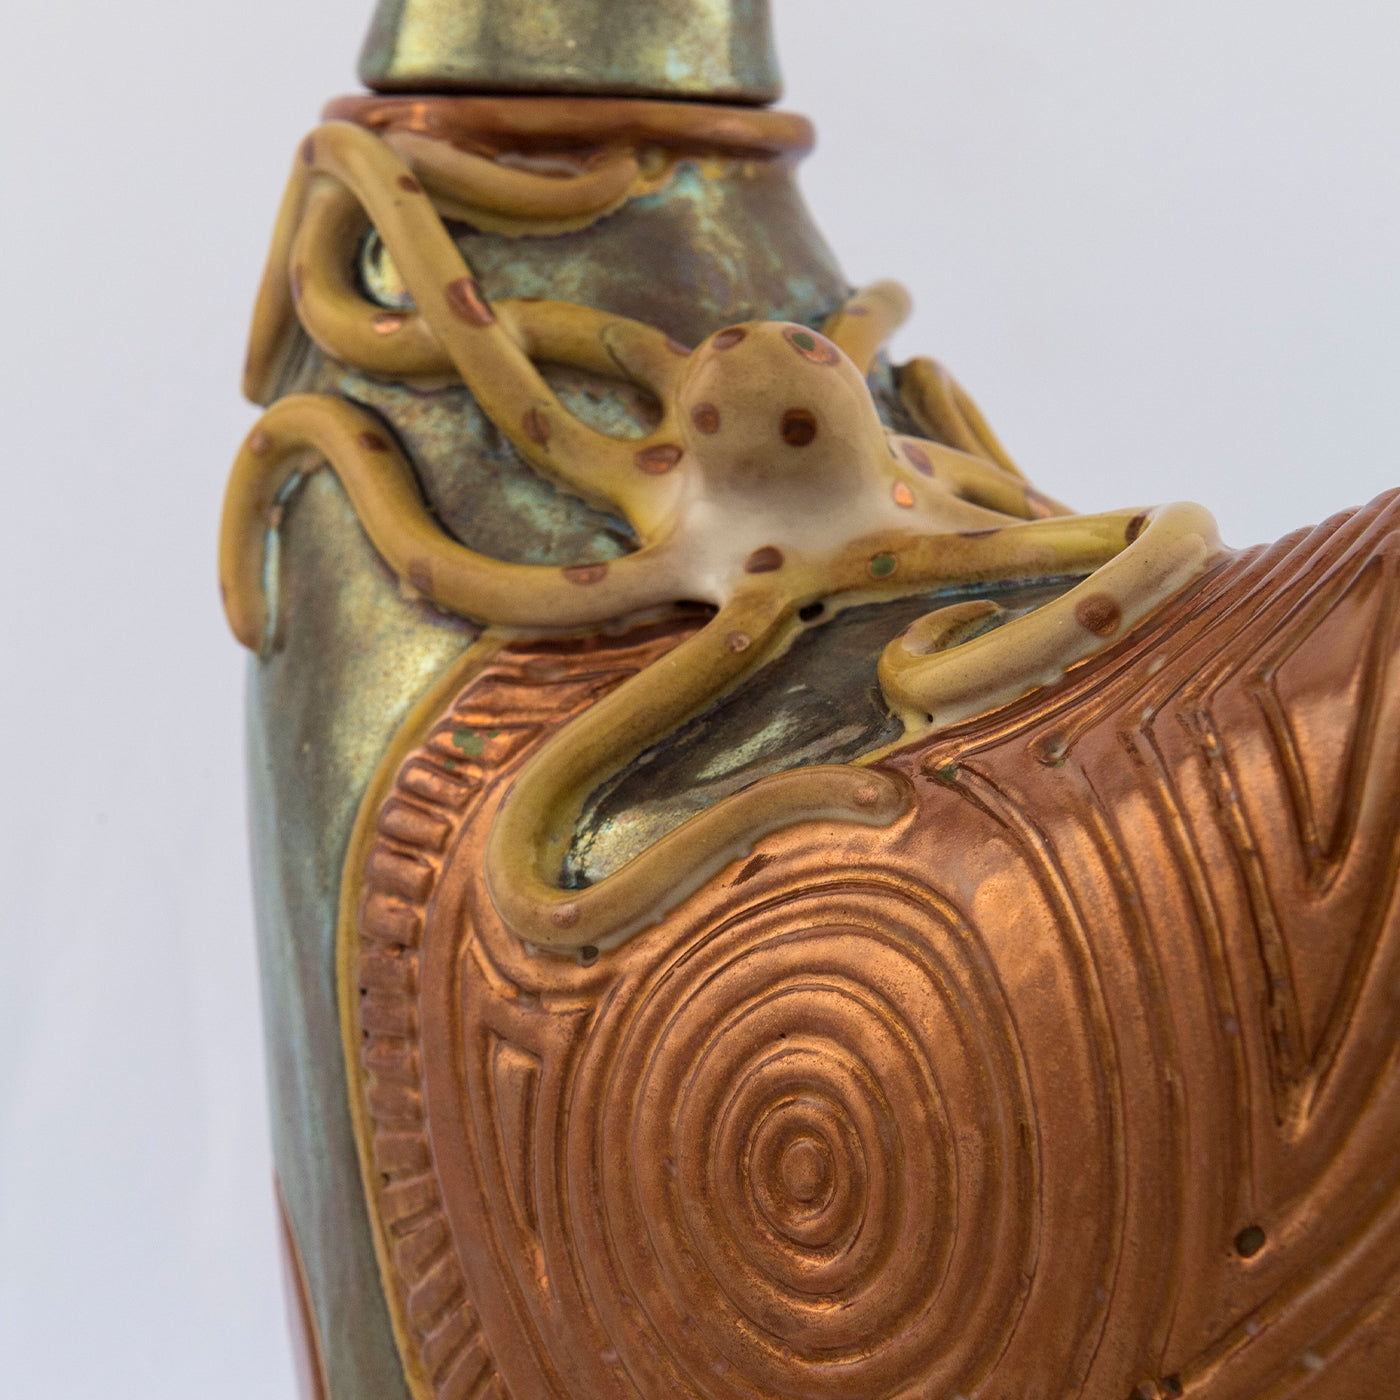 Vaso-Sirena Silver and Copper Lustre Vase with Lid - Alternative view 2